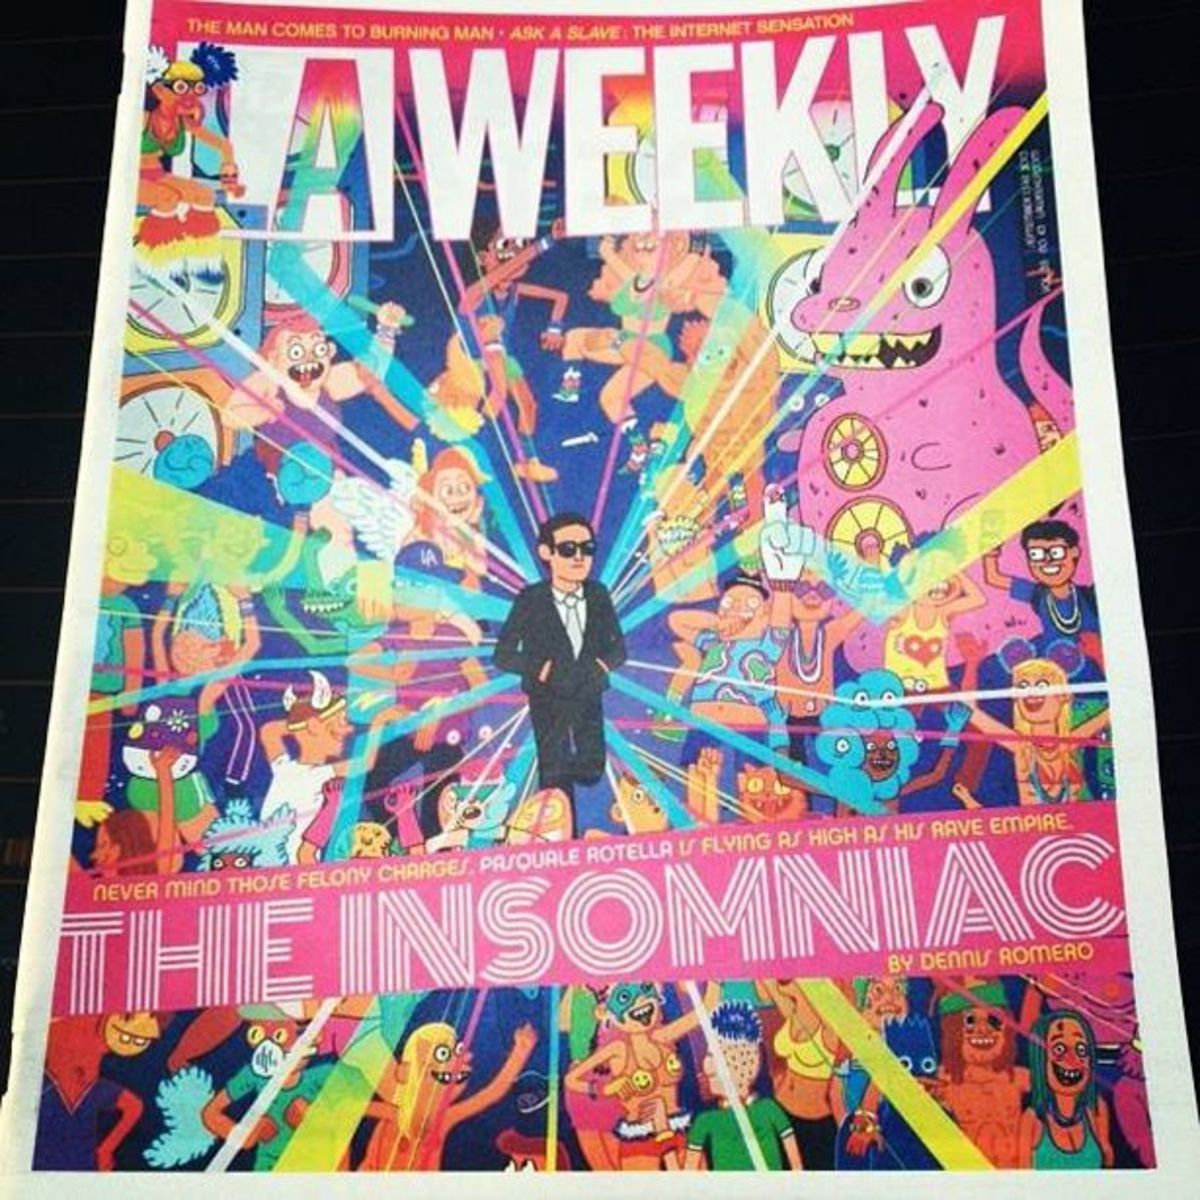 EDM News: Insomniac Events Founder Pasquale Rotella Graces The Cover Of The LA Weekly